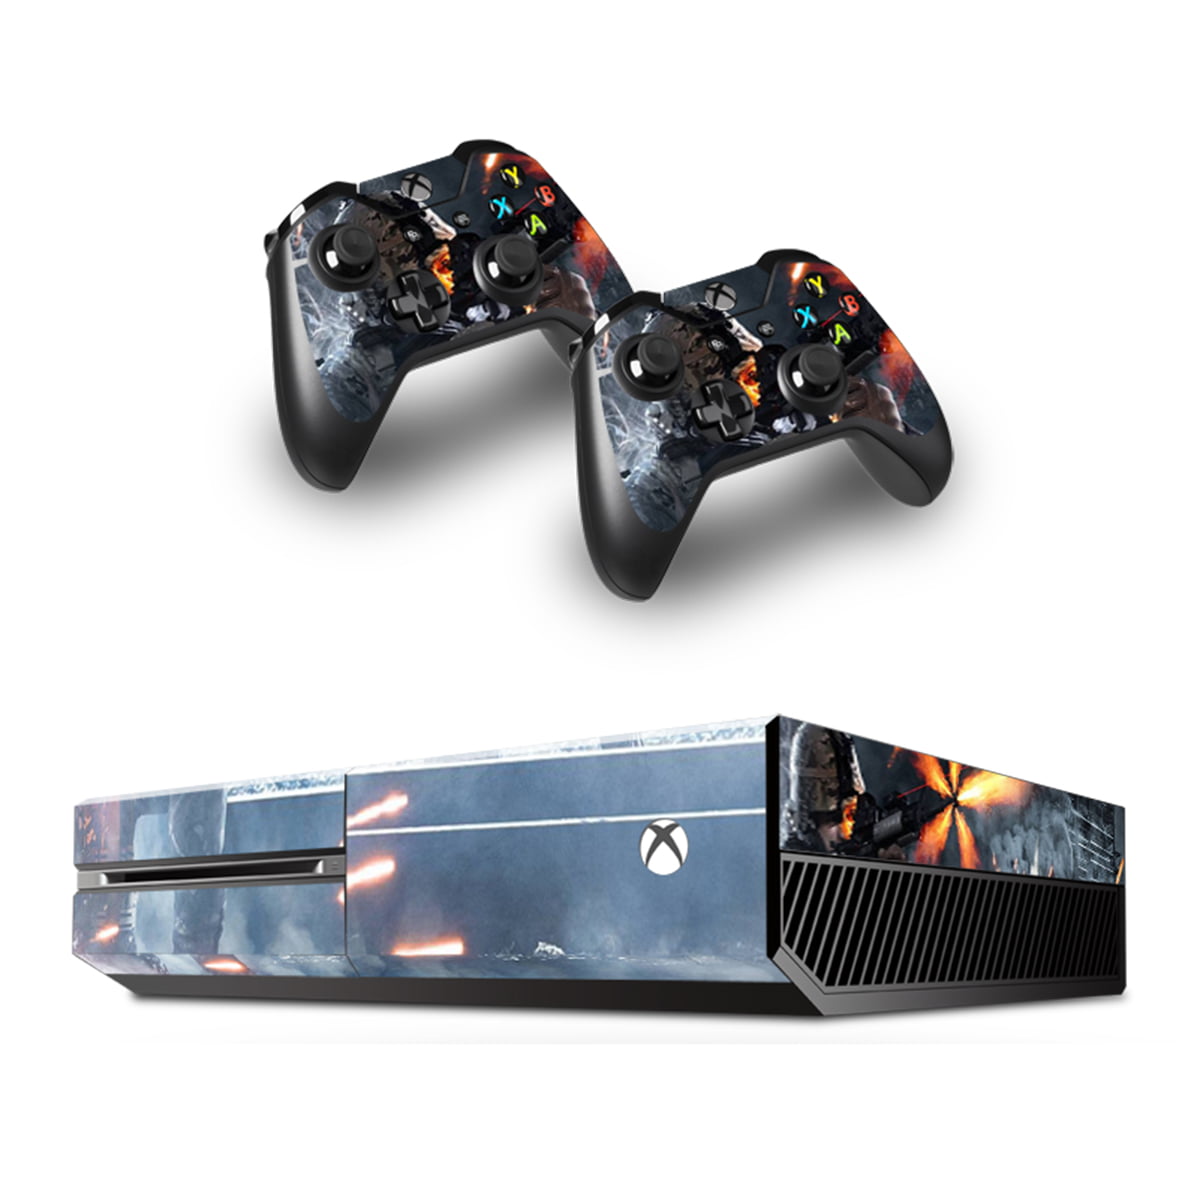  UUShop Protective Vinyl Skin Decal Cover for Microsoft Xbox One  Console wrap Sticker Skins with Two Free Wireless Controller Decals Blue  Fire Flame(NOT for One S or X) : Video Games